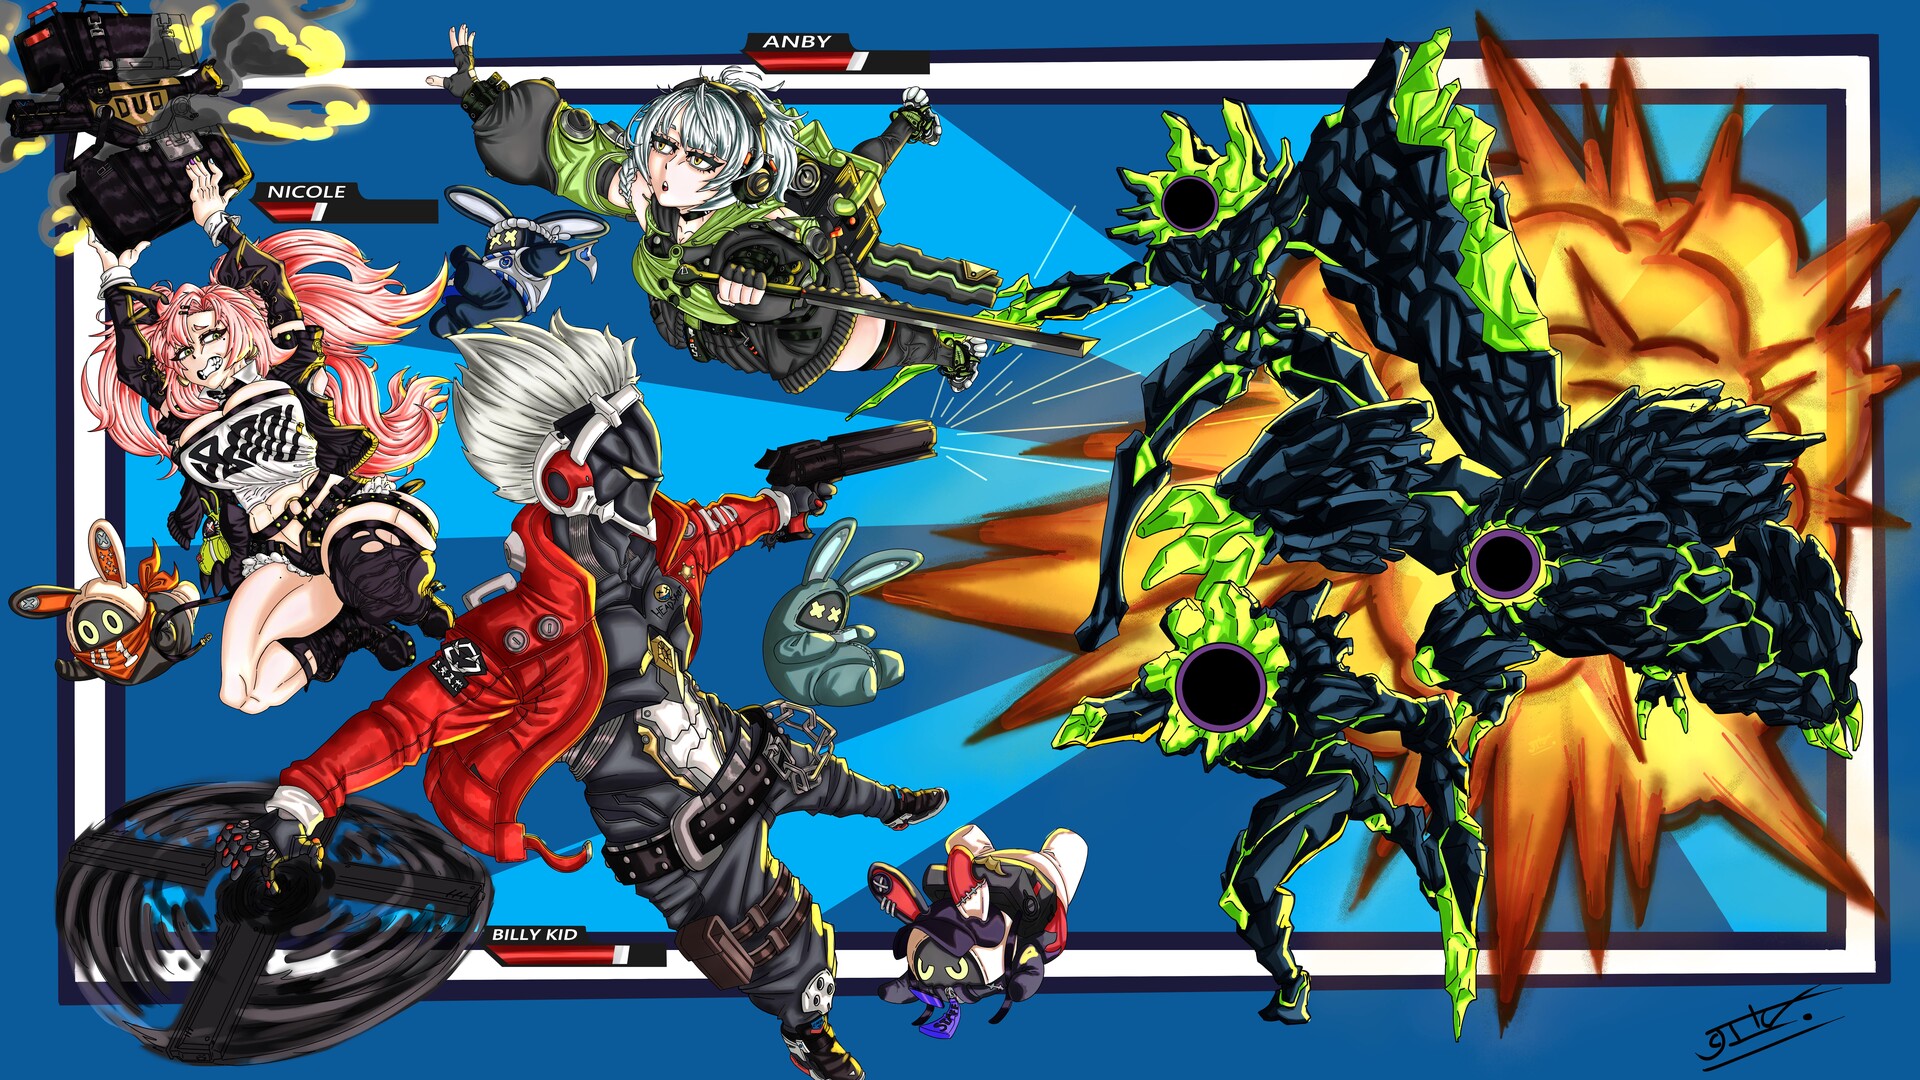 Preview: Zenless Zone Zero is a spectacle fighter with Persona